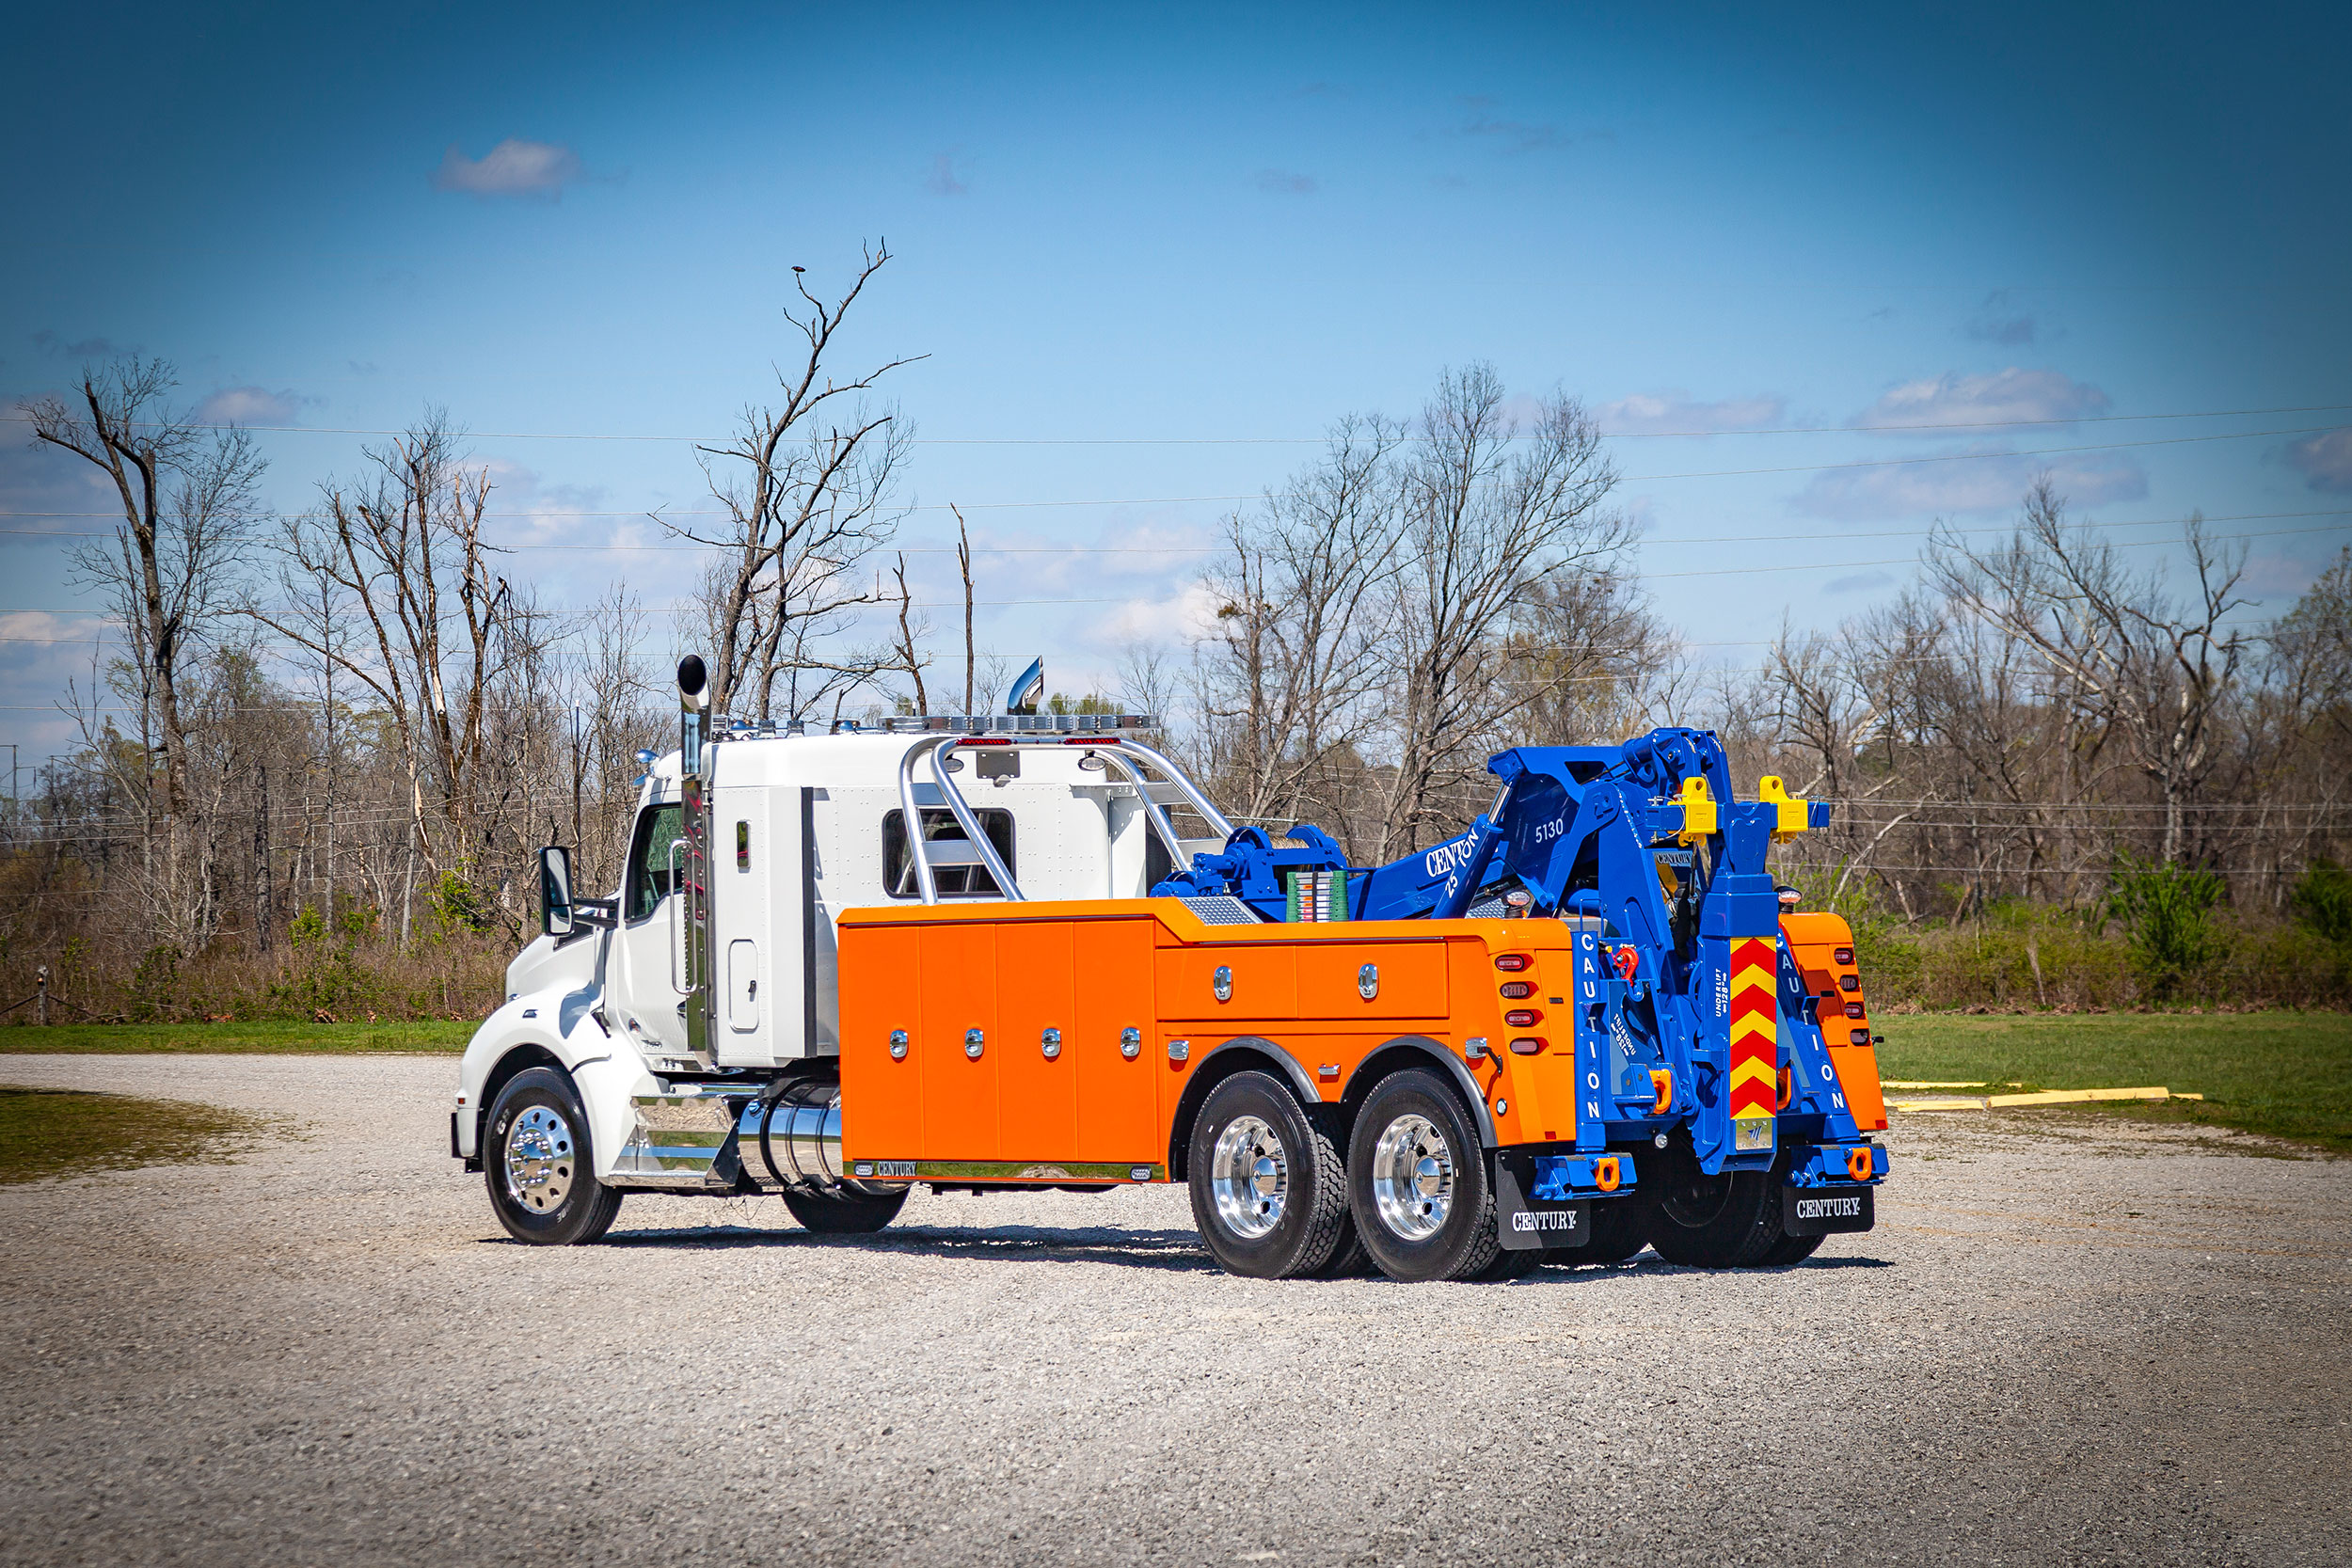 Century 5130 integrated heavy duty wrecker on a kenworth t880 chassis, unit photo 7 of 19